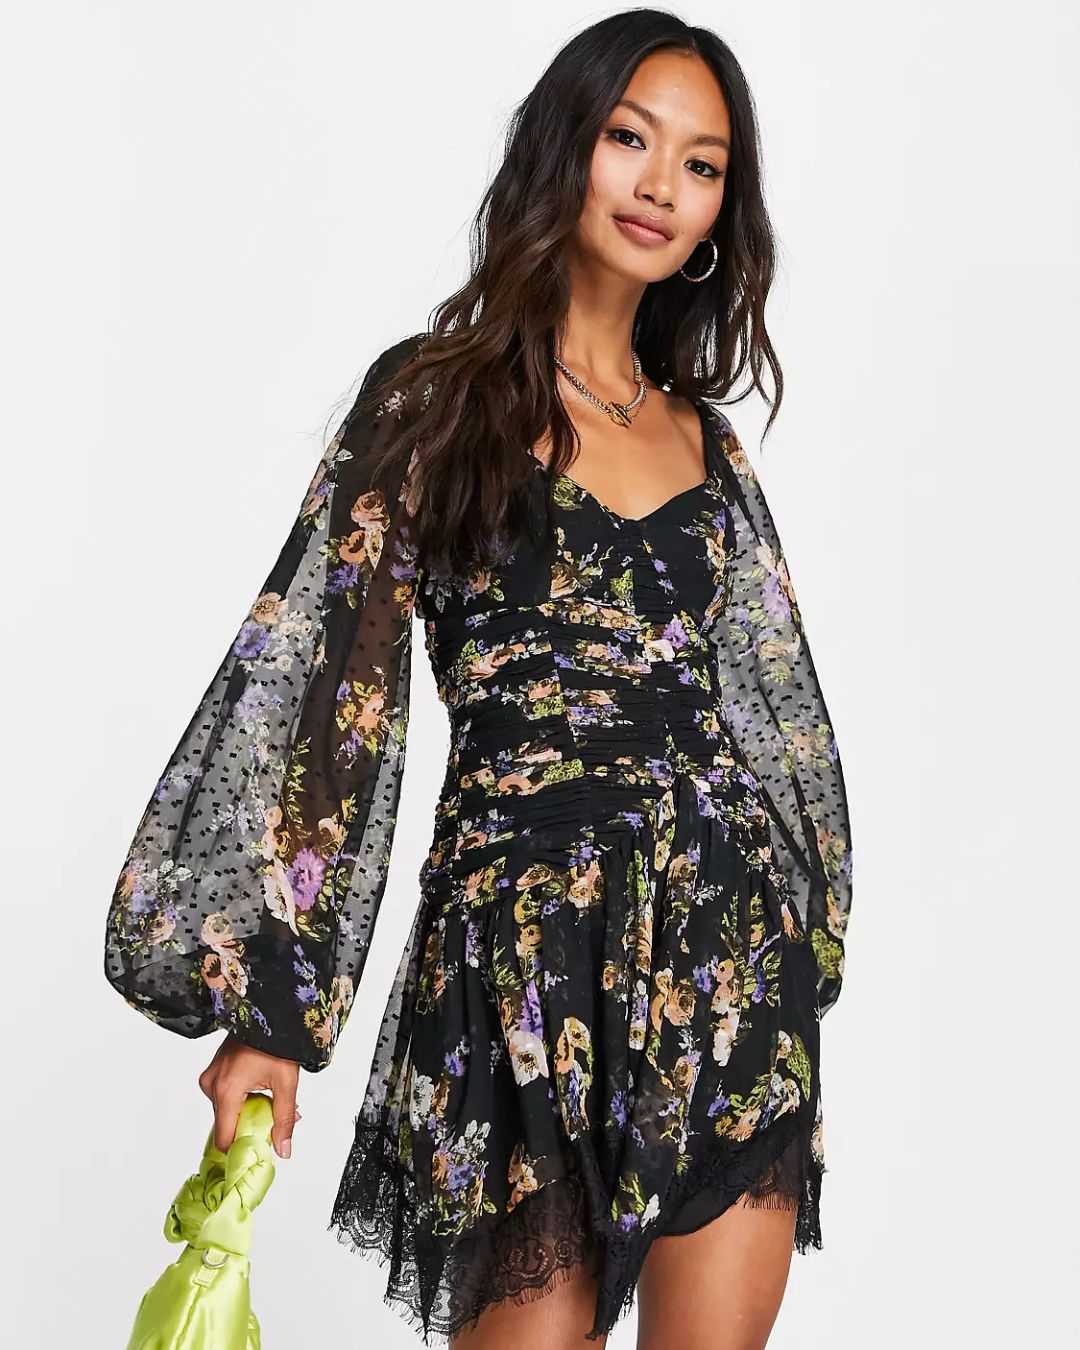 floral-fit-and-flare-dress-black,FLORAL FIT AND FLARE DRESS,Color: Black
Fabric: Georgette
Type: Fit And Flare
Fit: Slim Fit
Length: Mini
Neck: Sweetheart Neck
Sleeve: Puff Sleeve
Closure: Zipper
Print: Floral
Details: Gathered bodice and lace detail,dresses,dresses,vacation,soft girl,woven,georgette,black,floral,gathered,lace,slim fit,fit and flare,mini,asymmetric,sweetheart neck,puff sleeves,long sleeves